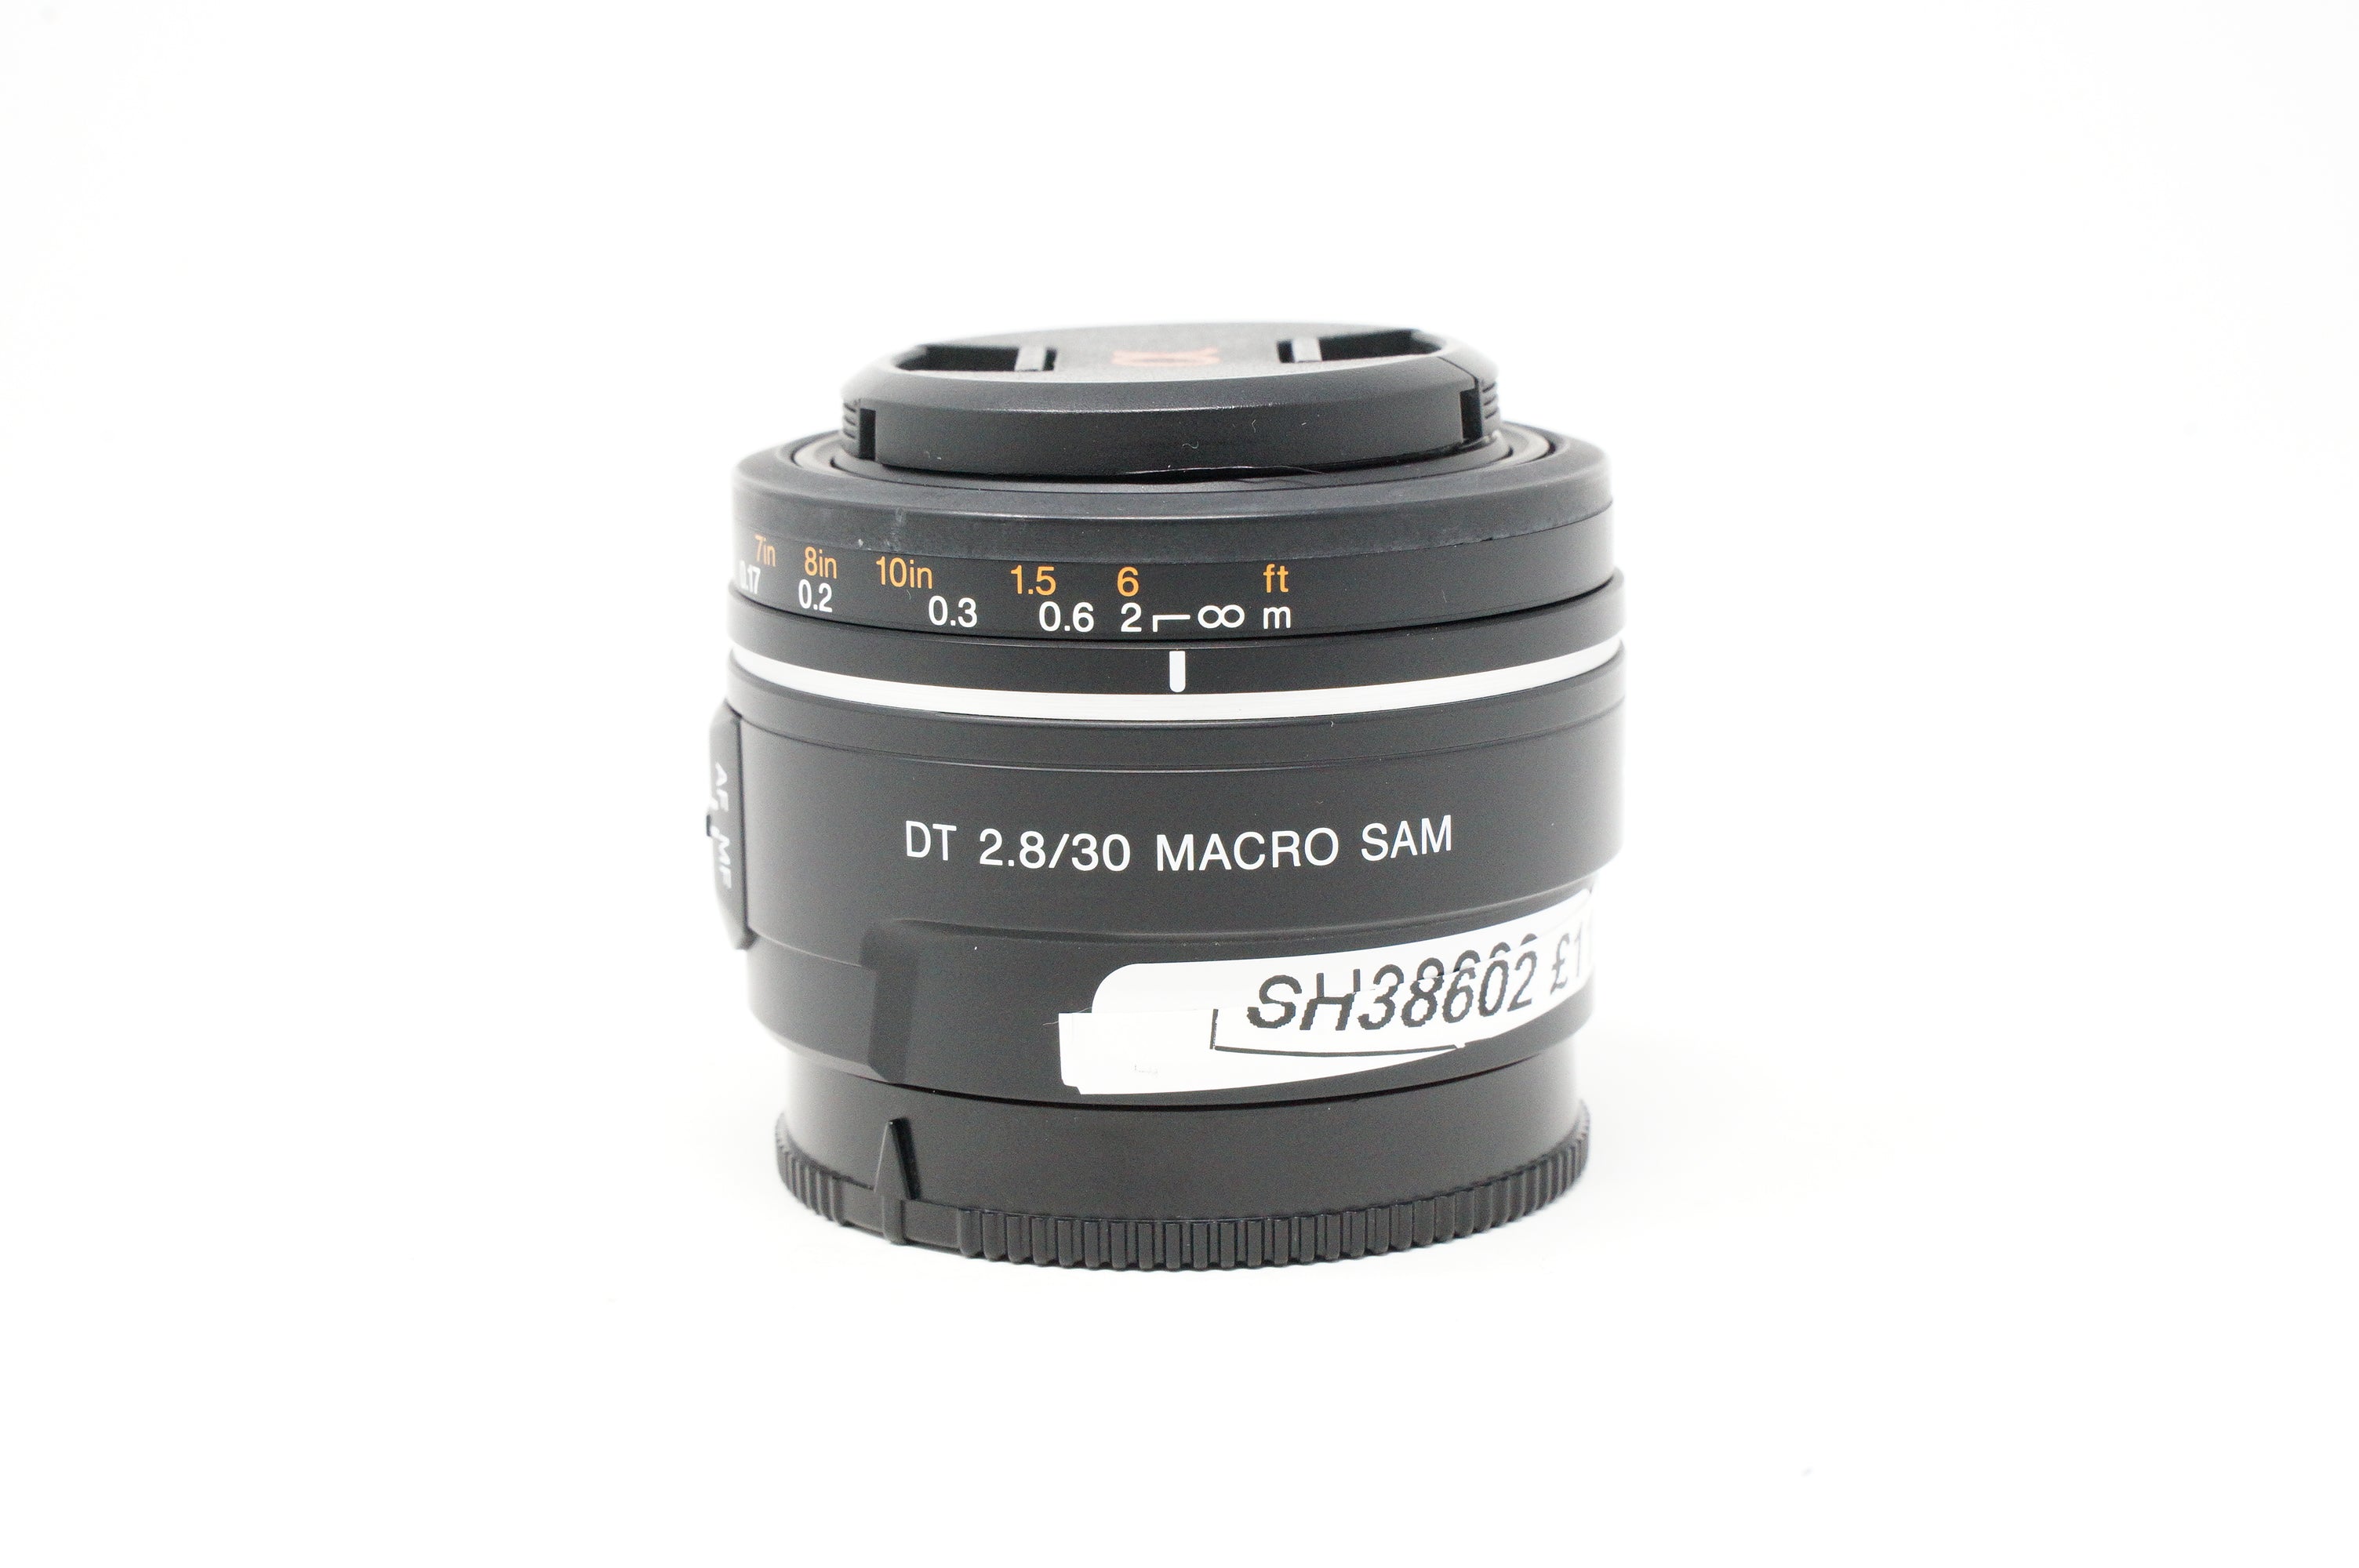 Product Image of Used Sony DT 30mm F2.8 Macro lens SAM for Sony A mount (Boxed SH38602)